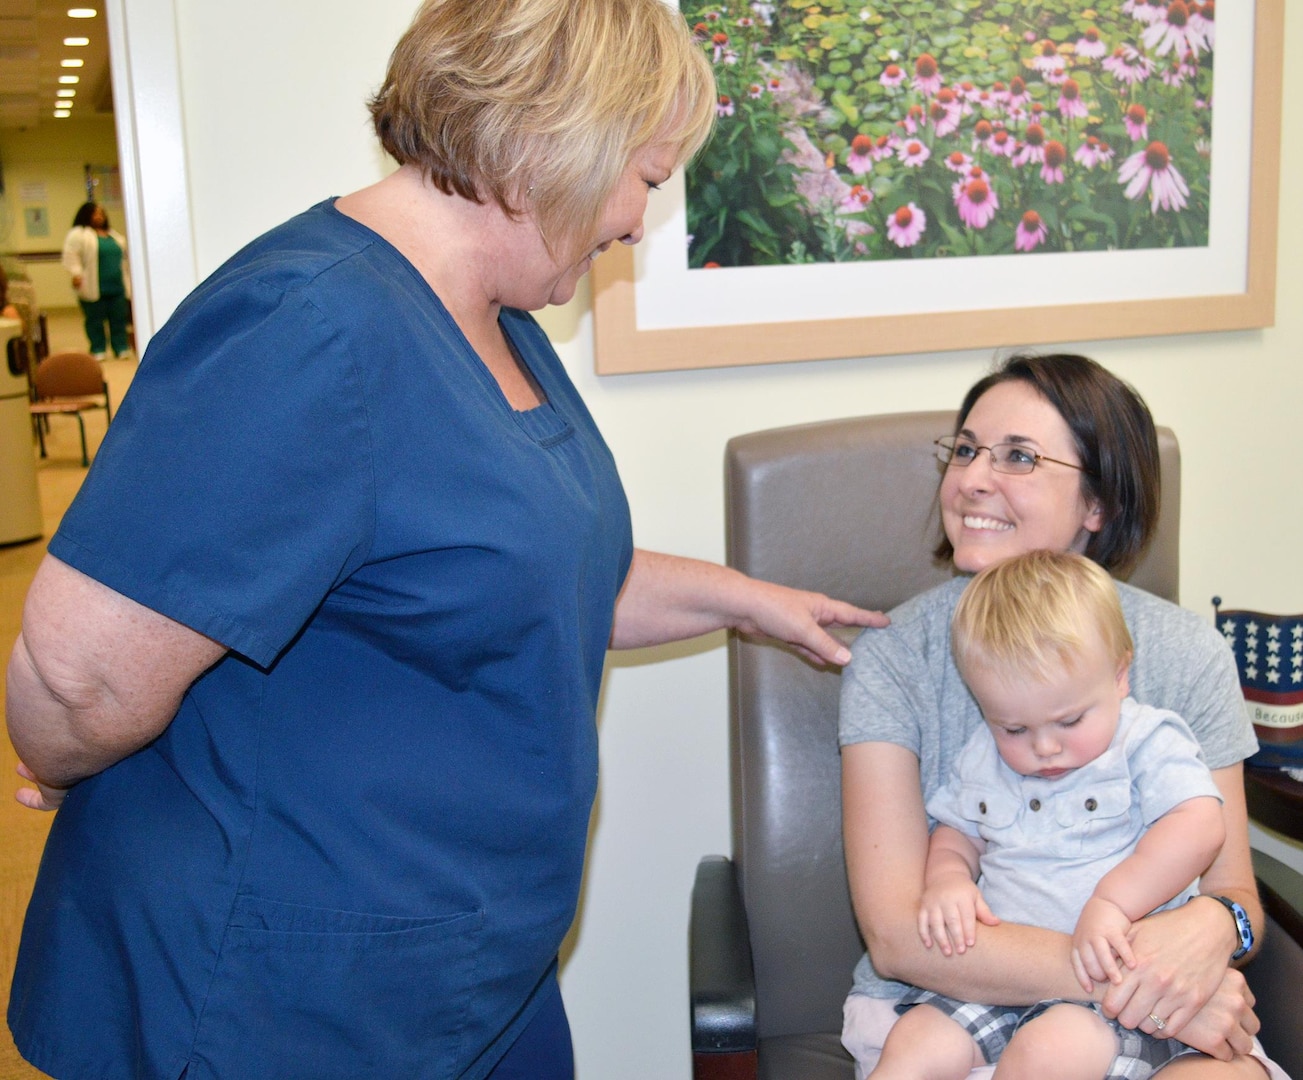 Lactation consultant Carolyn Lowe (left) talks with Bridget Owens about breastfeeding her baby, 16-month-old James Owens, during an appointment June 24 at Brooke Army Medical Center.